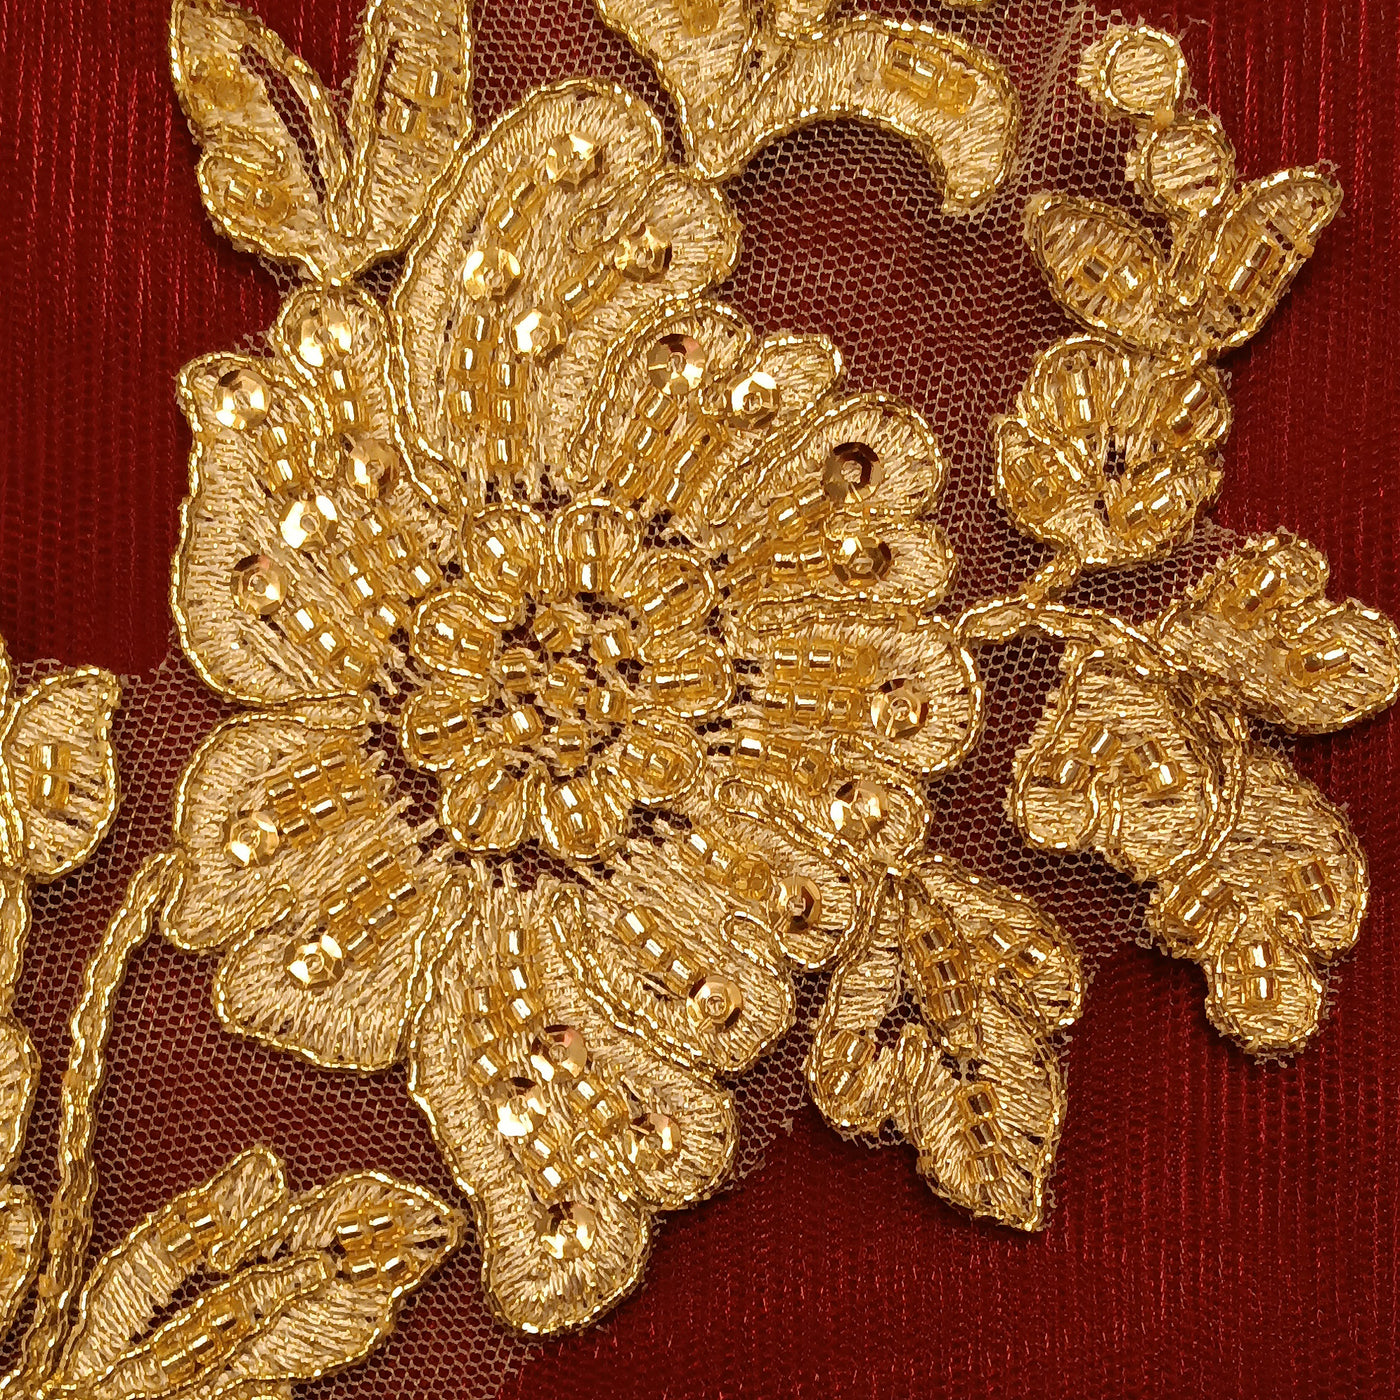 Beaded & Corded Gold Floral Appliqué Lace Embroidered on 100% Polyester Organza or Net Mesh. This can be applied to Theatrical dance ballroom costumes, bridal dresses, bridal headbands endless possibilities.  Sold By Pair.  Lace Usa